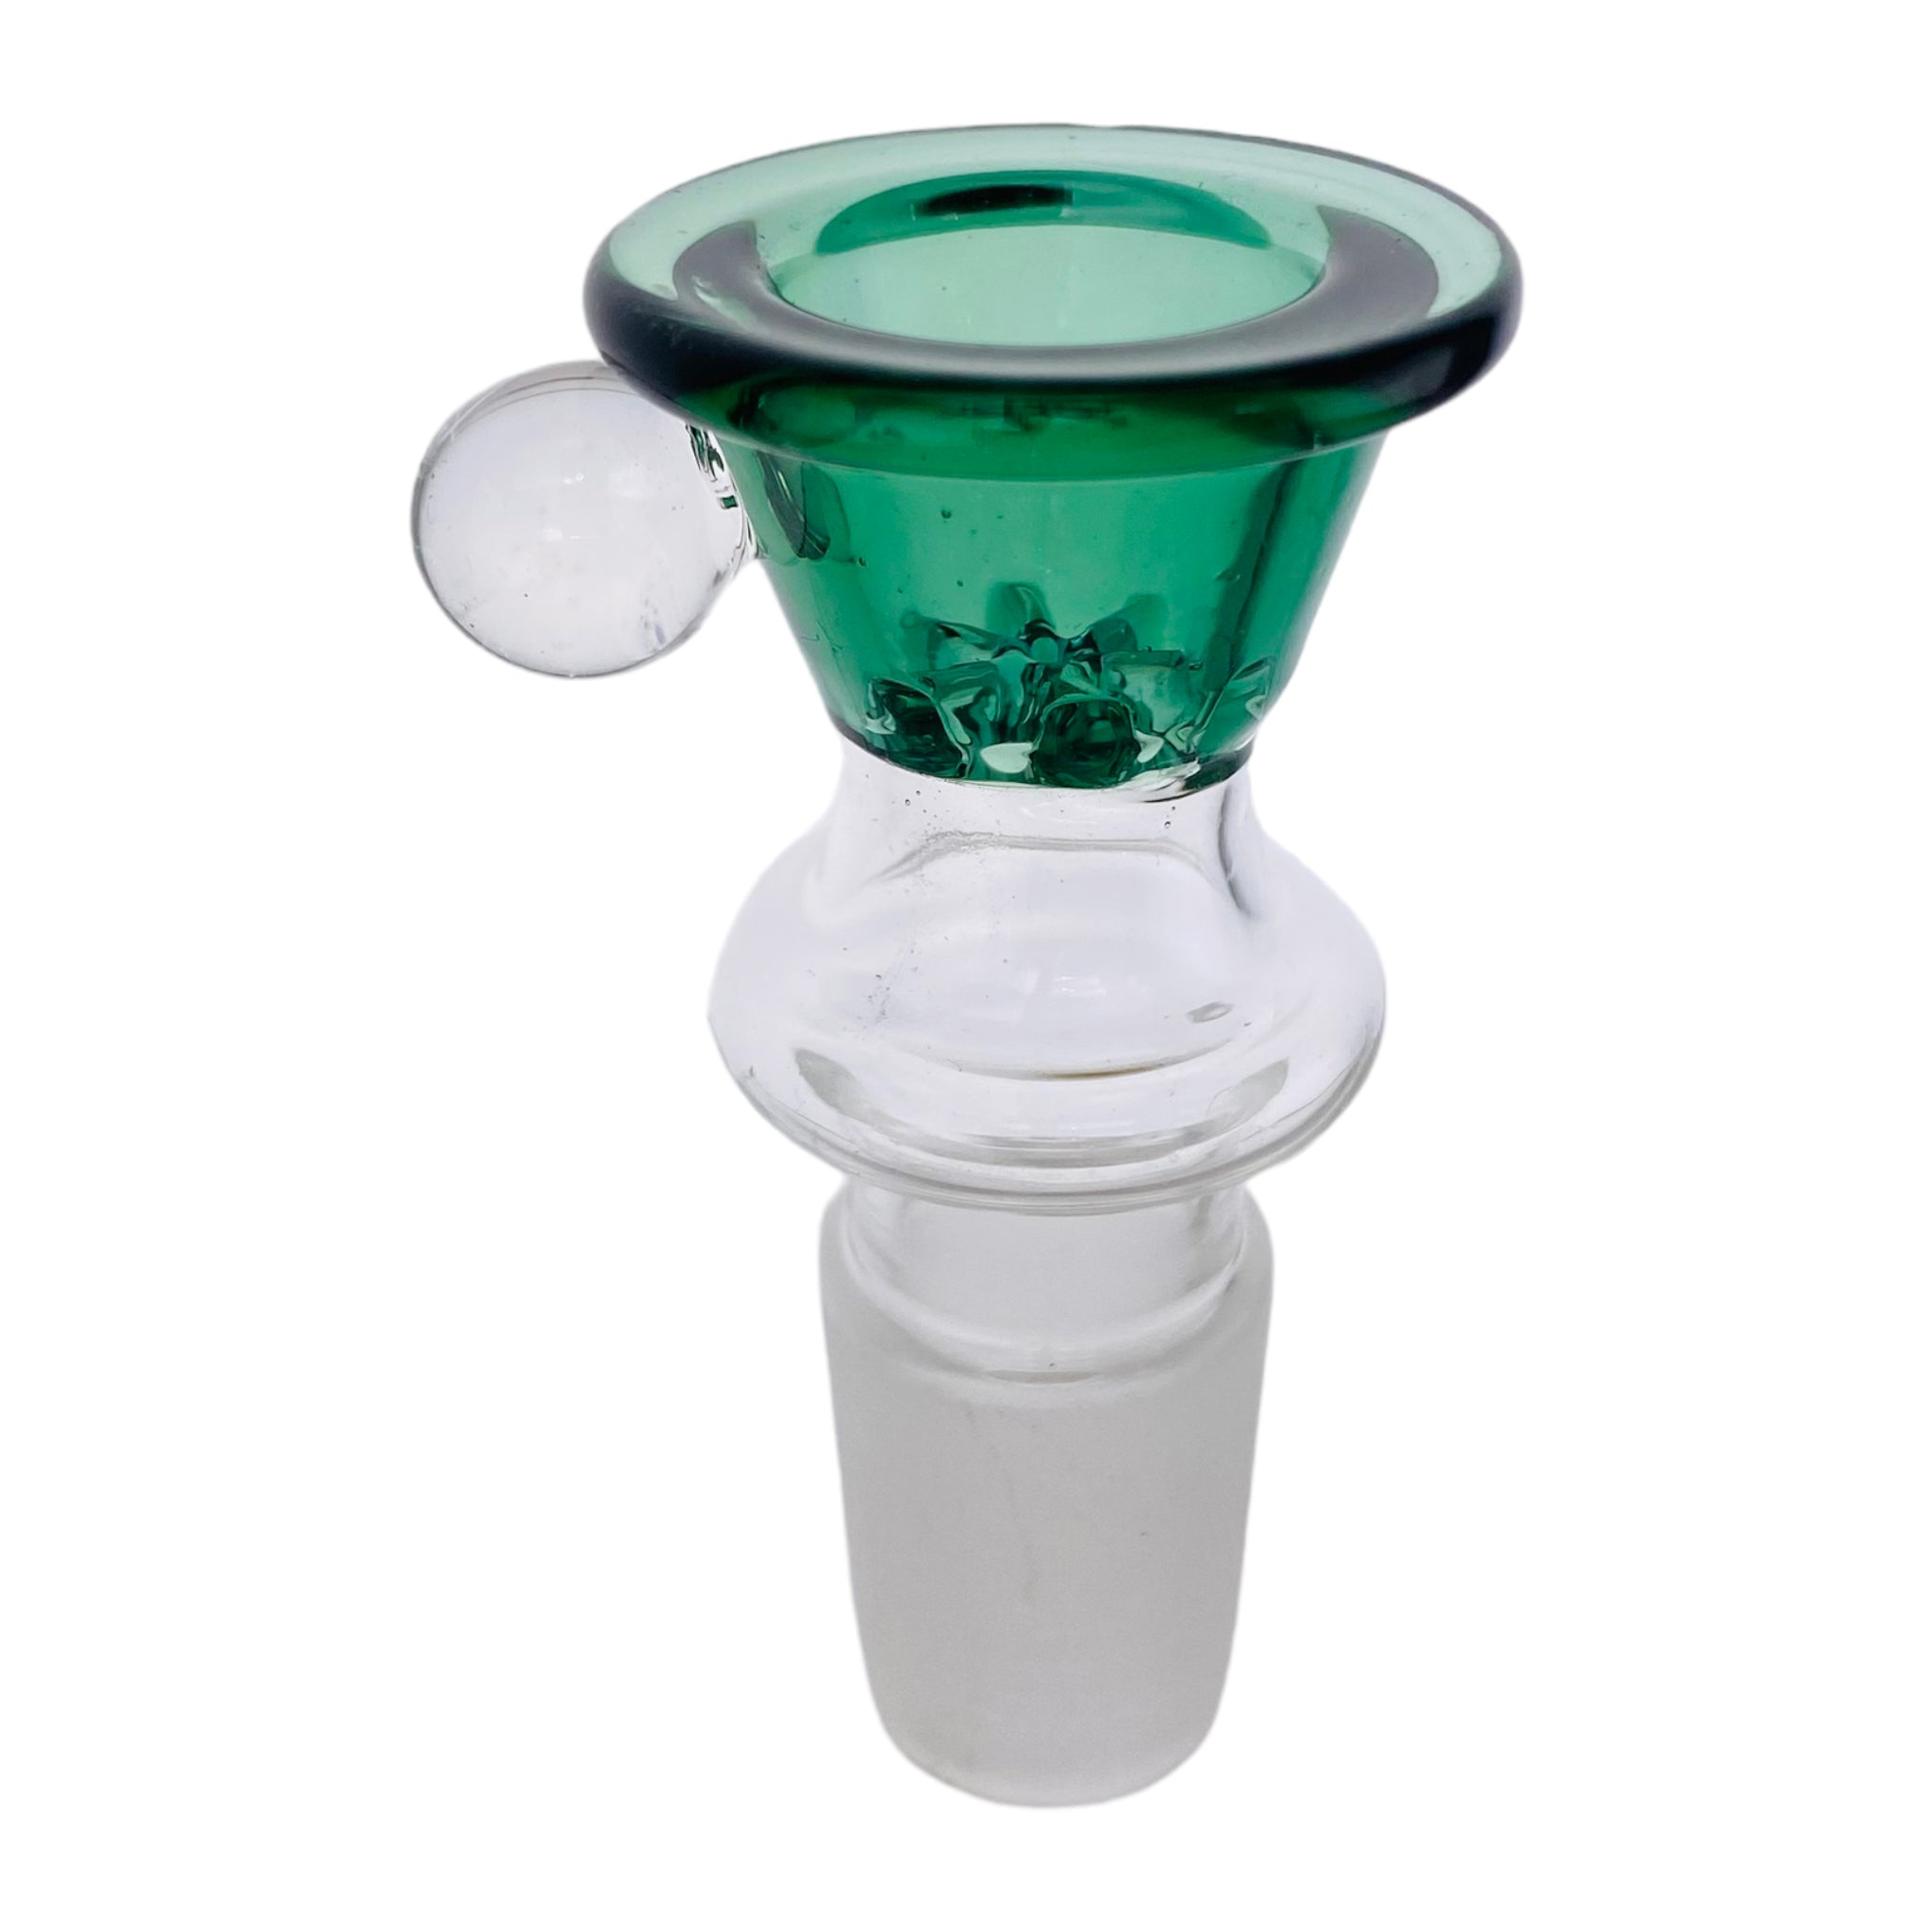 18mm Flower Bowl - Large Martini Funnel Bong Bowl Piece With Built In Screen - Lake Green